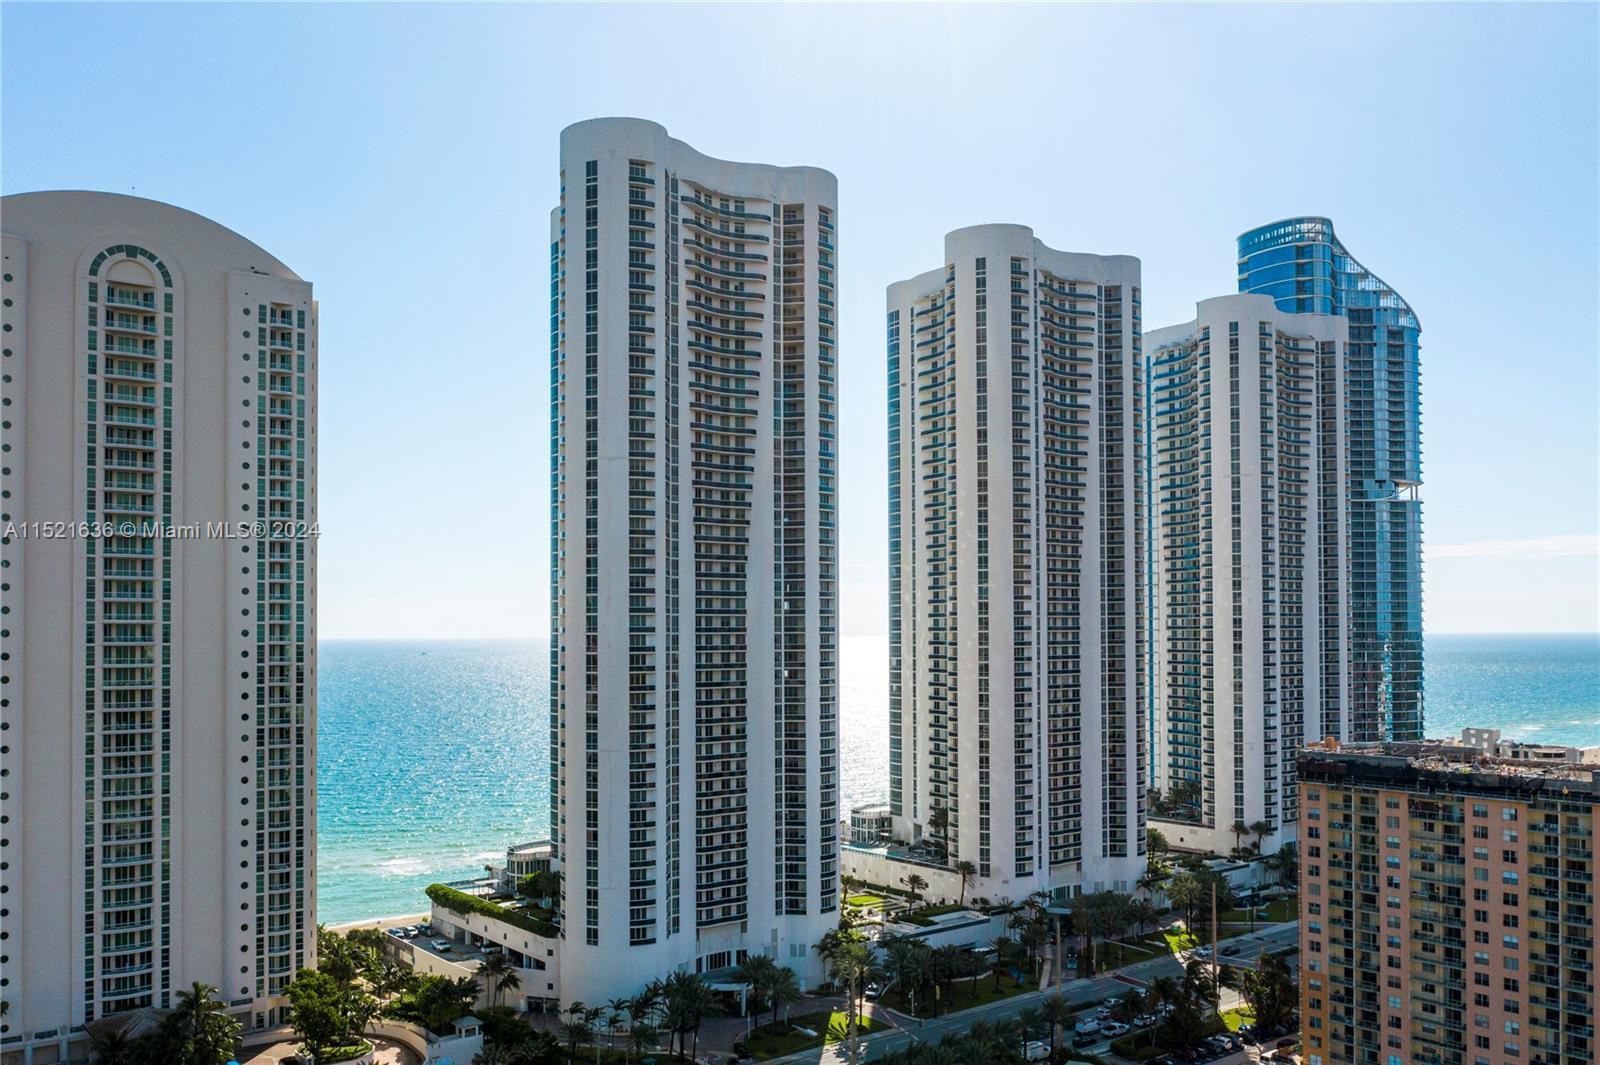 Photo of 16001 Collins Ave #404 in Sunny Isles Beach, FL